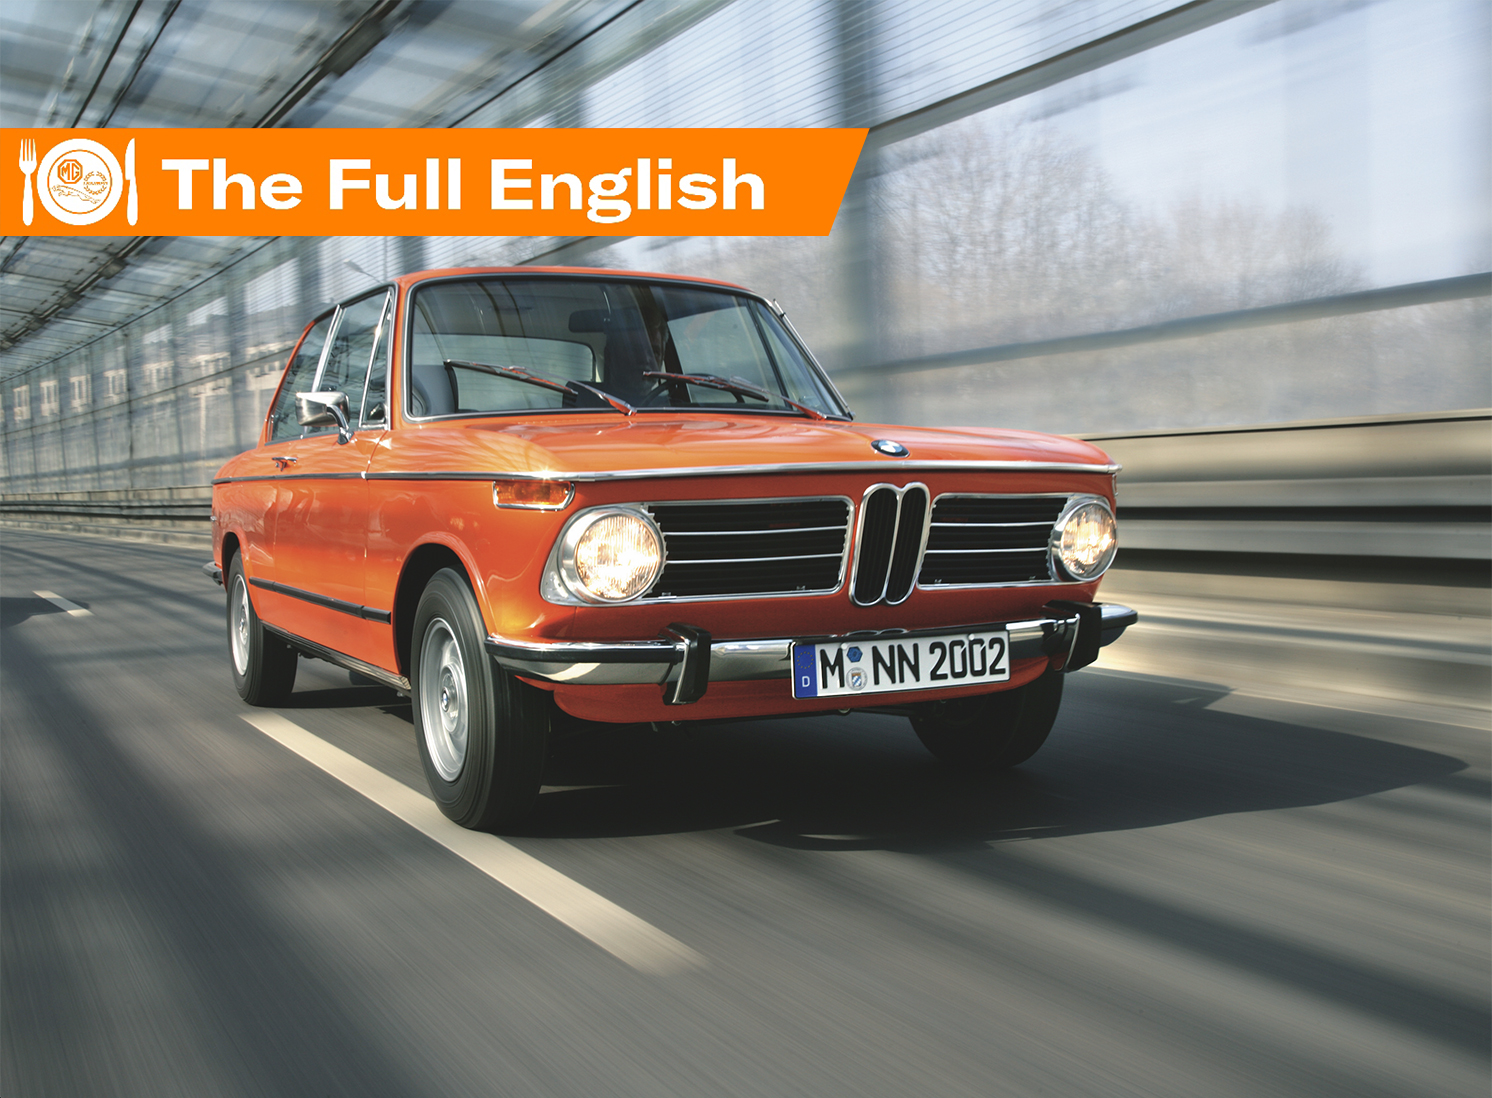 The Full English: The BMW 2002 has always been head of the Klasse